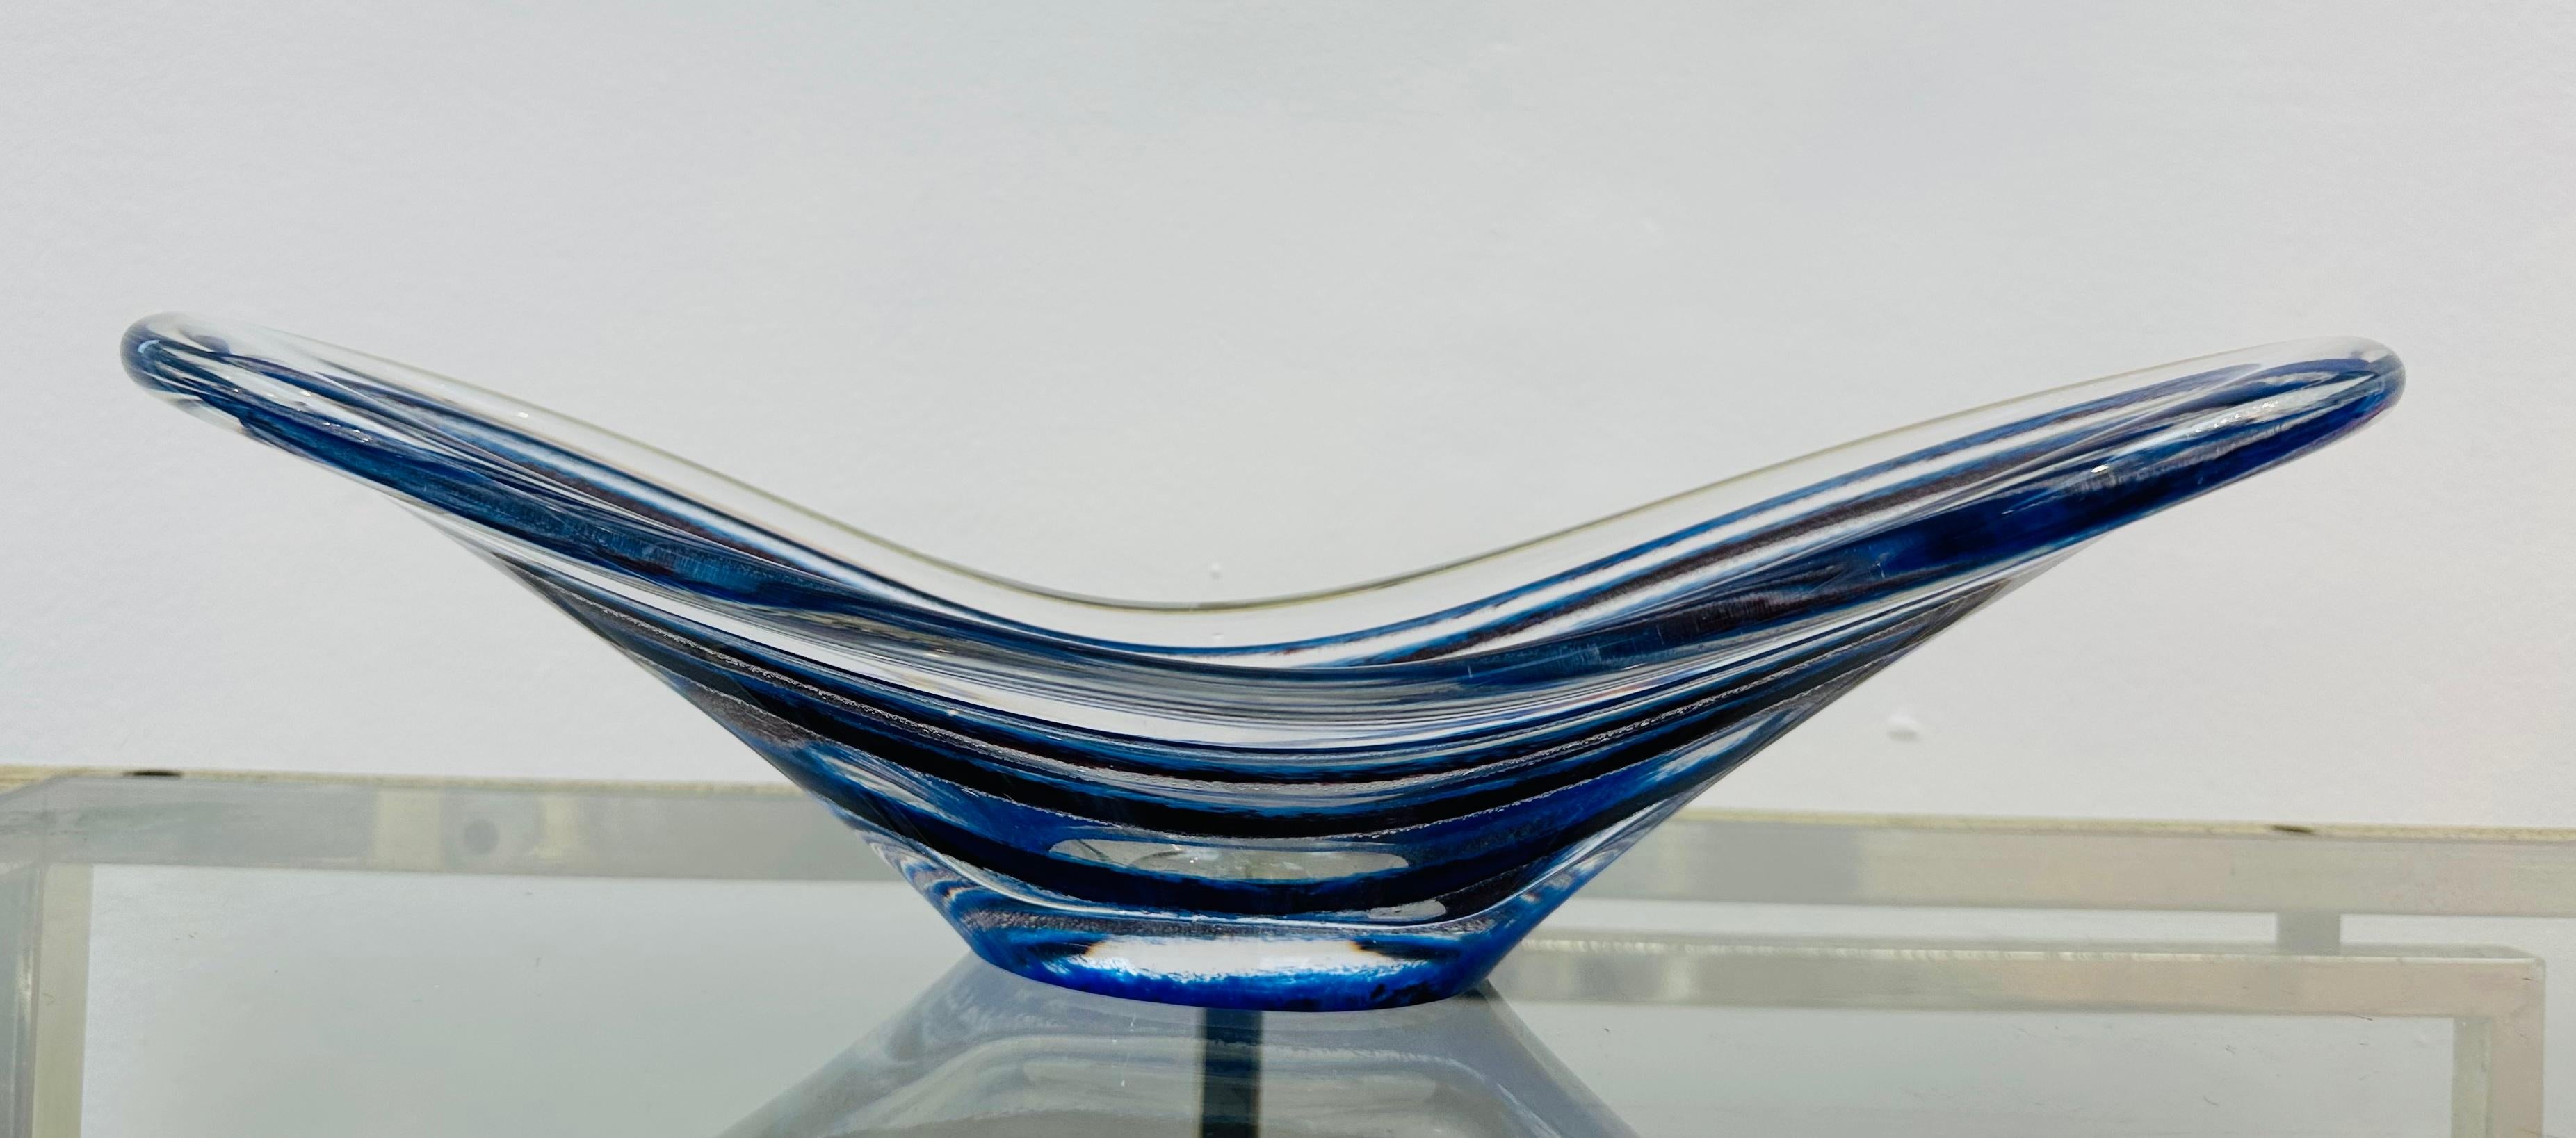 Vicke Lindstrand for Kosta blue striped glass bowl from the 1950s. It is a beautiful and iconic piece of Swedish glass design.

Vicke Lindstrand was one of the most important glass designers of the 20th century. He was known for his innovative use